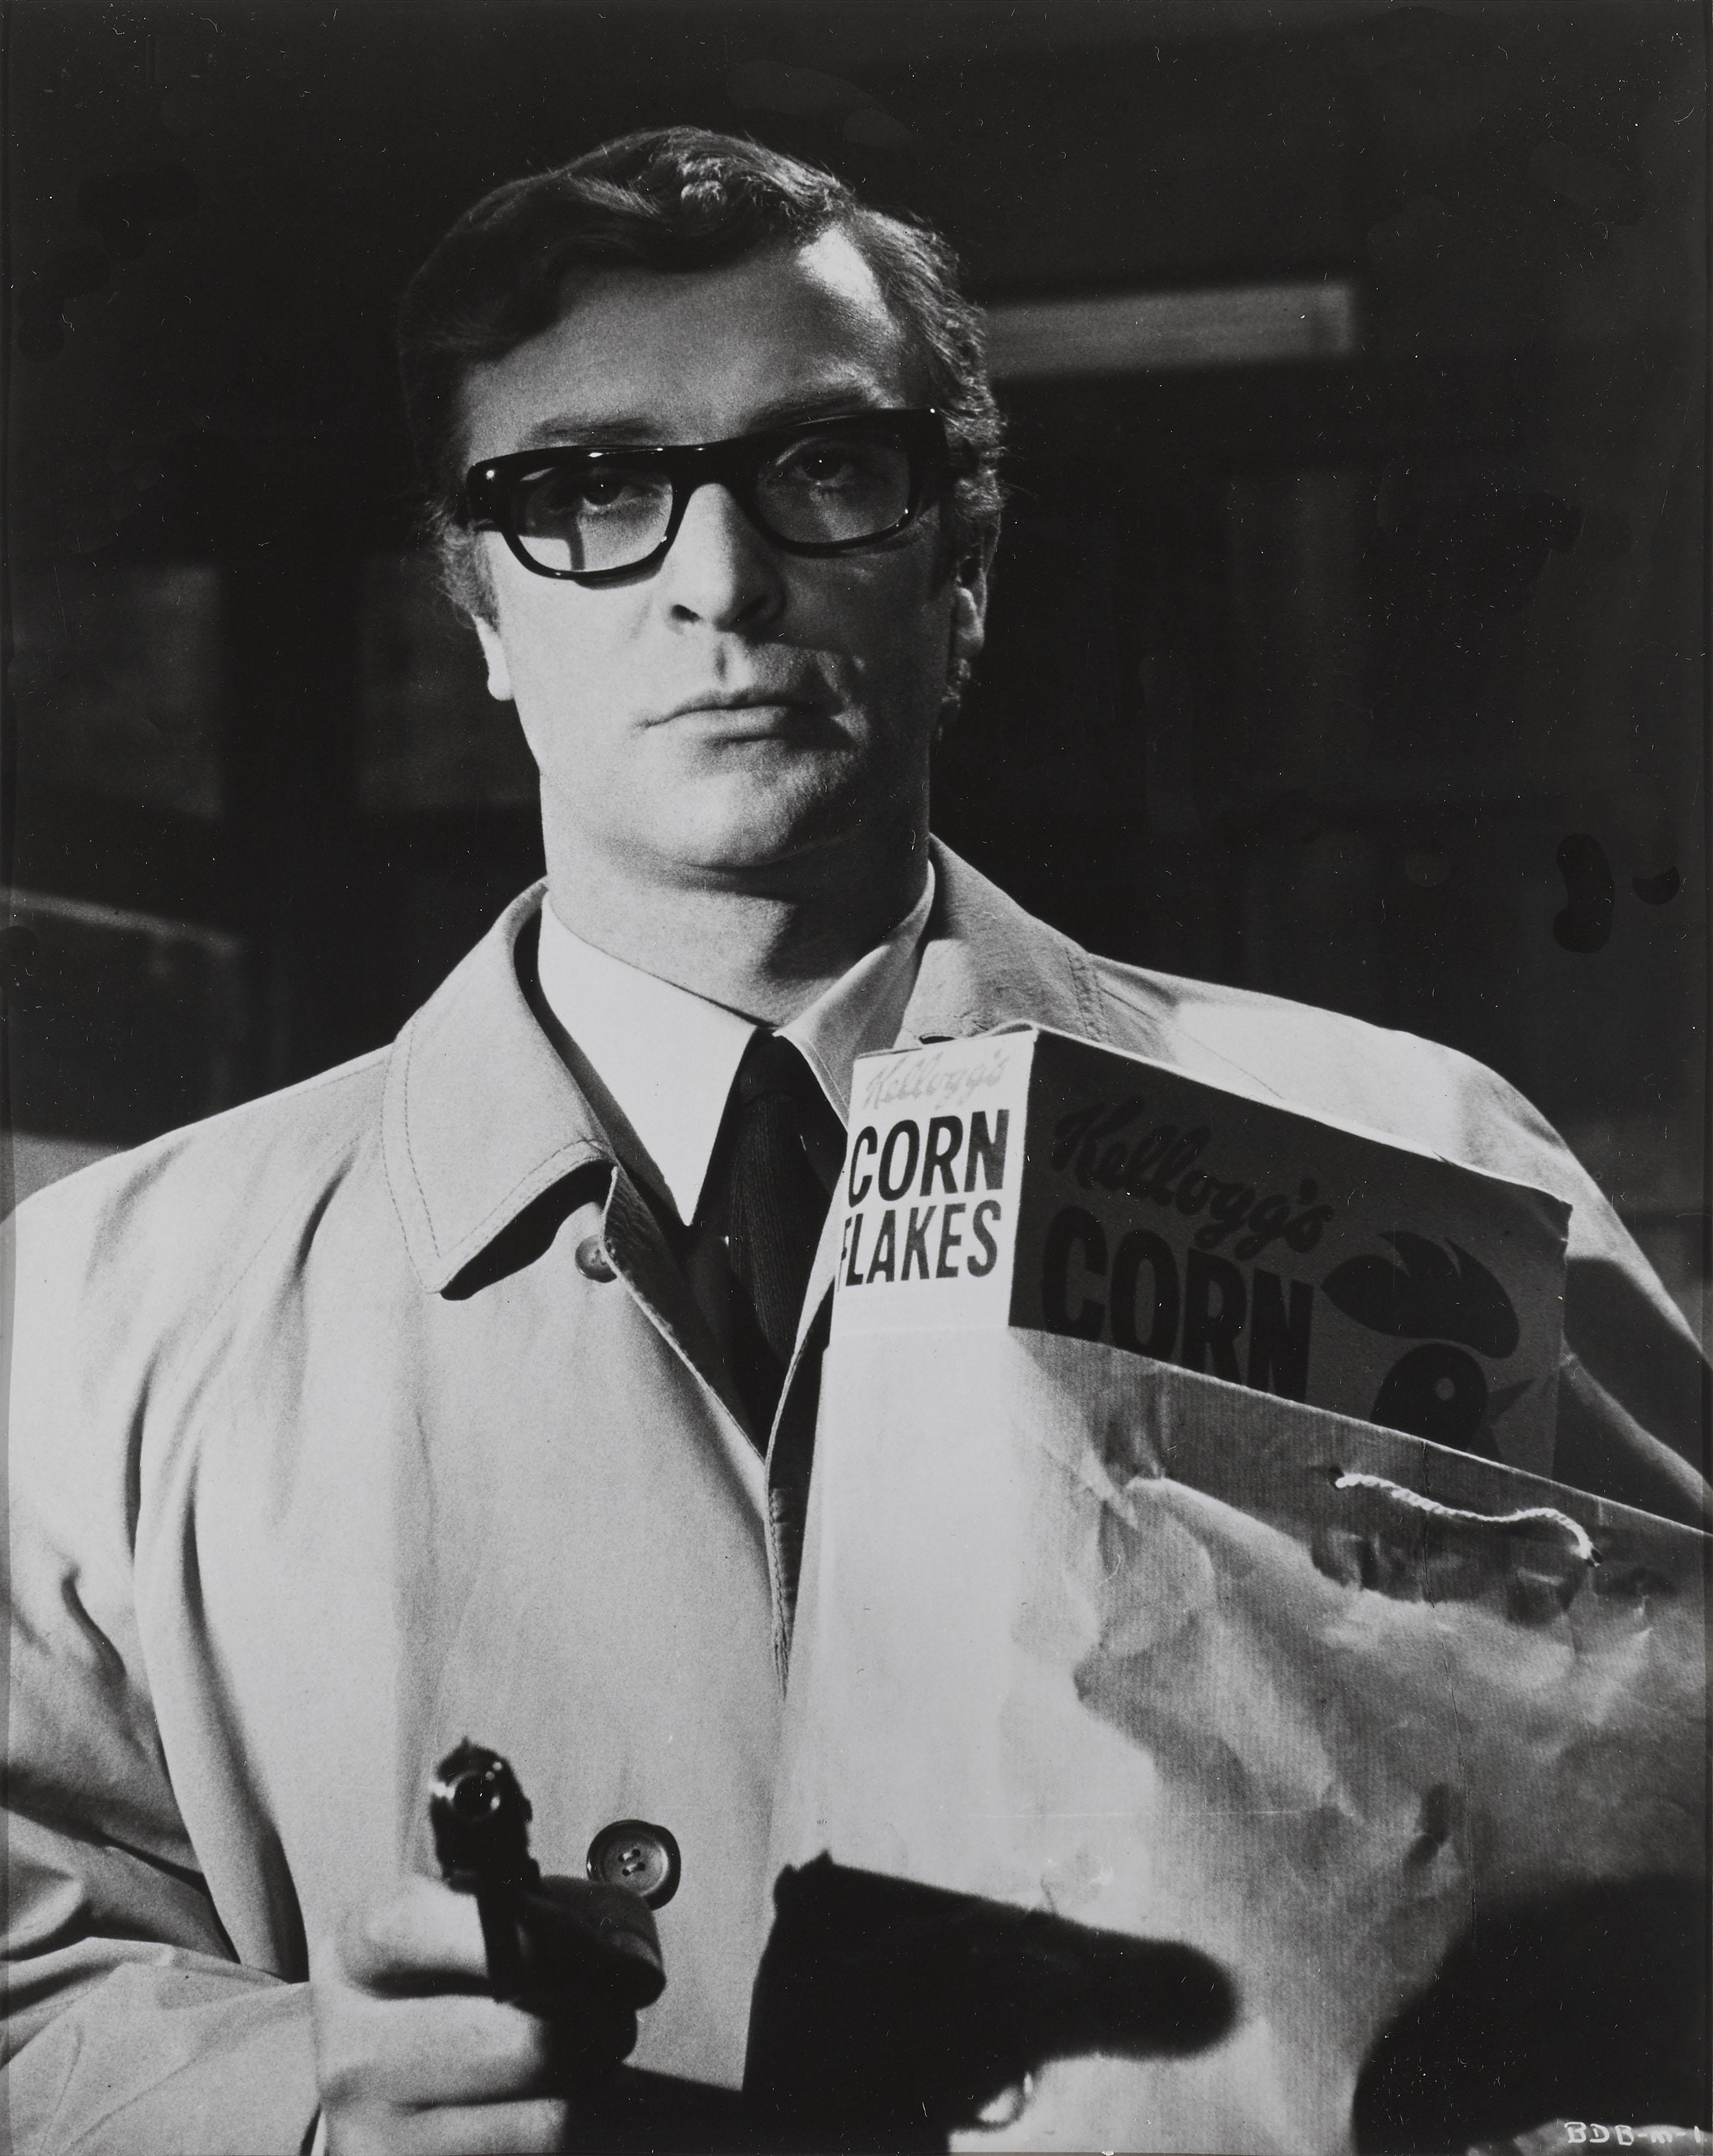 Original US photographic production still for the 1965 film The Ipcress File.
The film Starred Michael Caine and was  was directed Sidney J. Furie.
The piece is conservation framed with UV plexiglass in a Tulip wood frame with acid free card mounts.